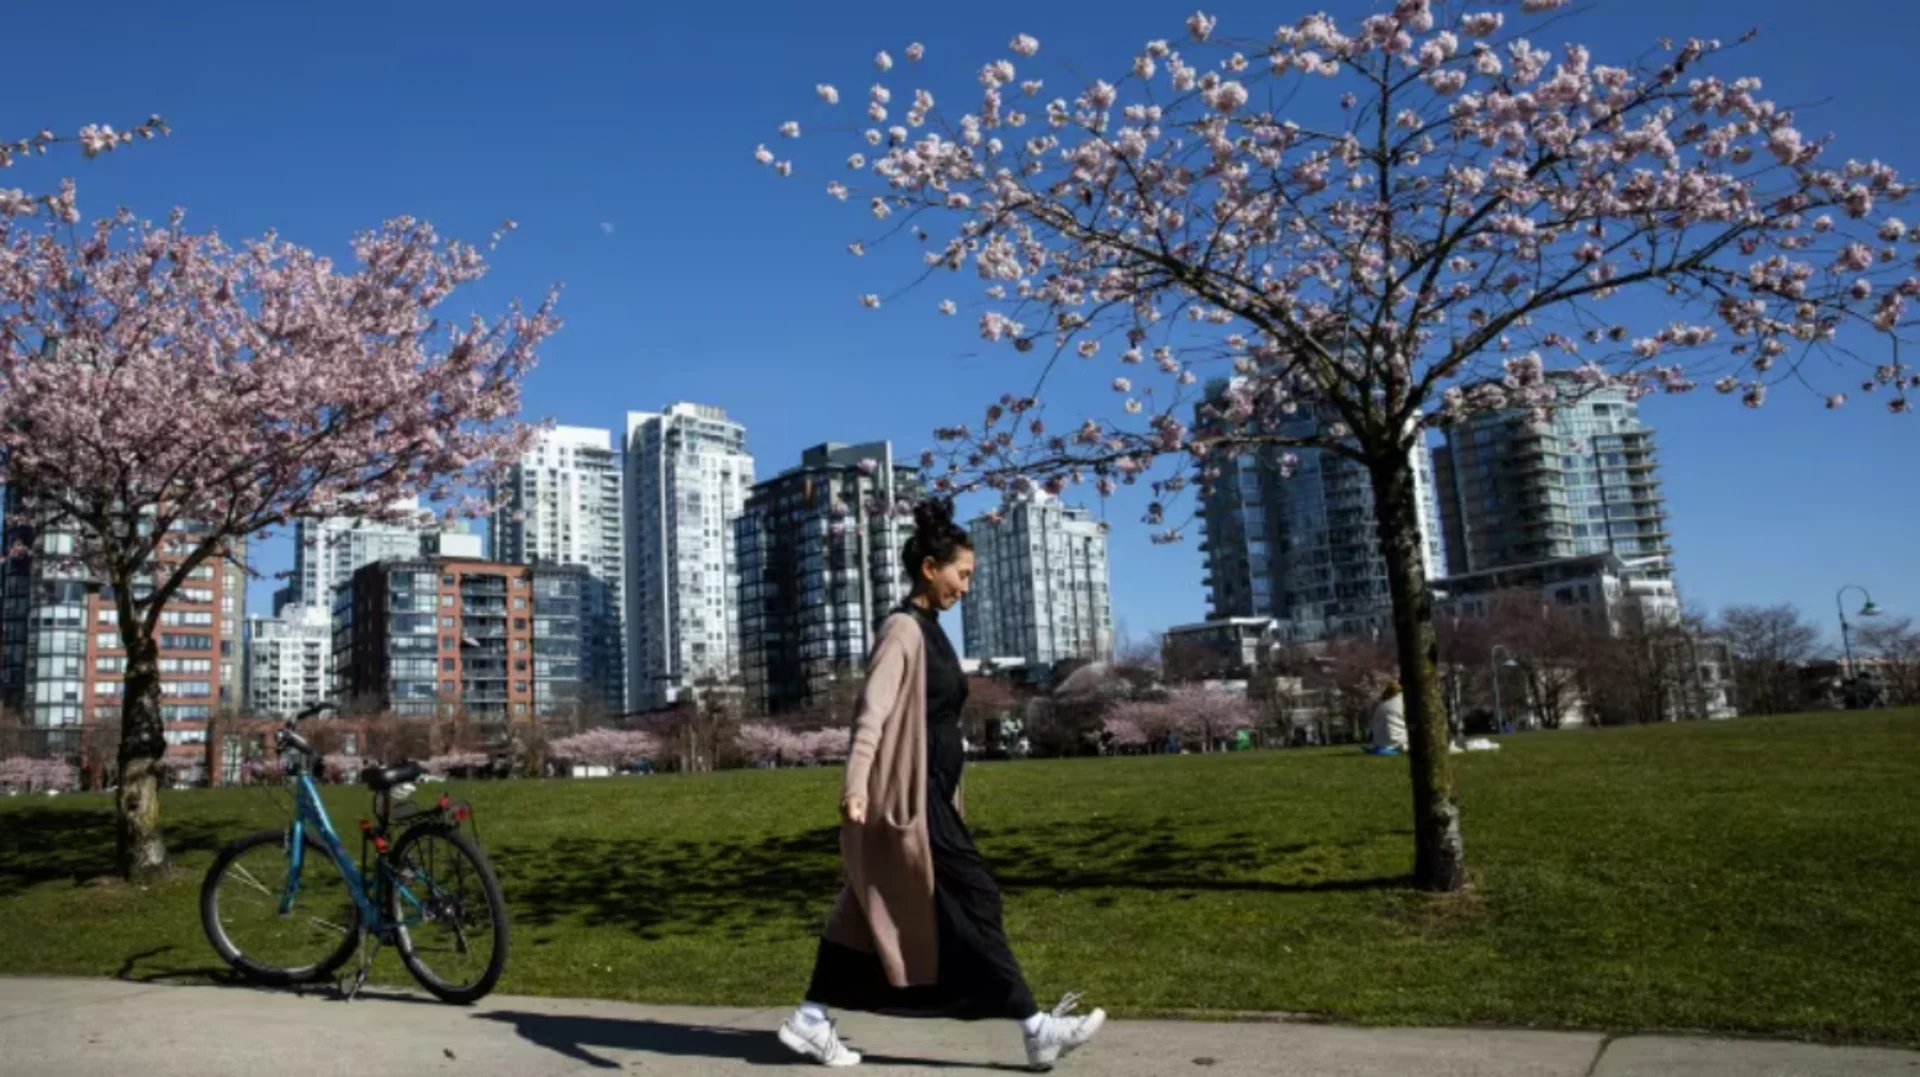 CBC: Cherry blossoms are already flowering at David Lam Park in Vancouver on Monday. After a warm winter, many plants and flowers are blooming weeks early in regions across Canada. (Nav Rahi/CBC)